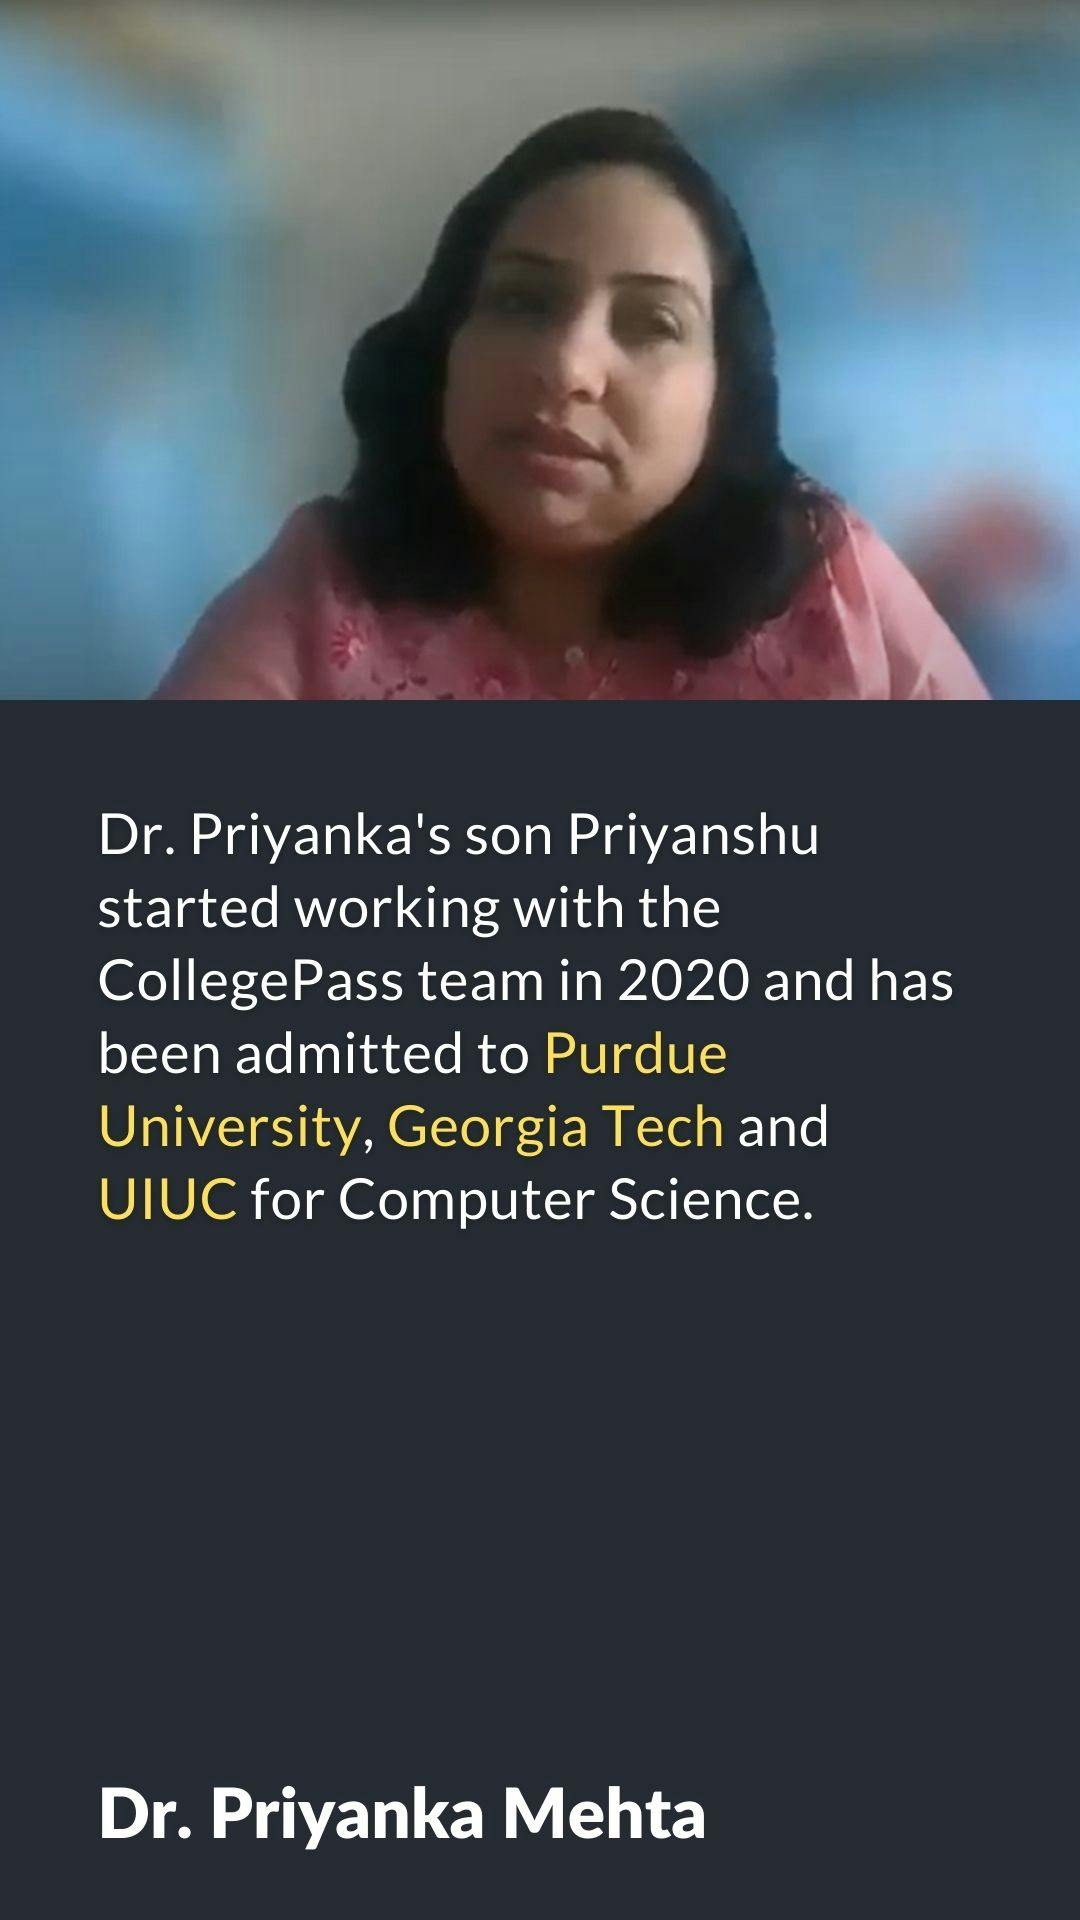 Priyanshu started working with CollegePass team in 2020